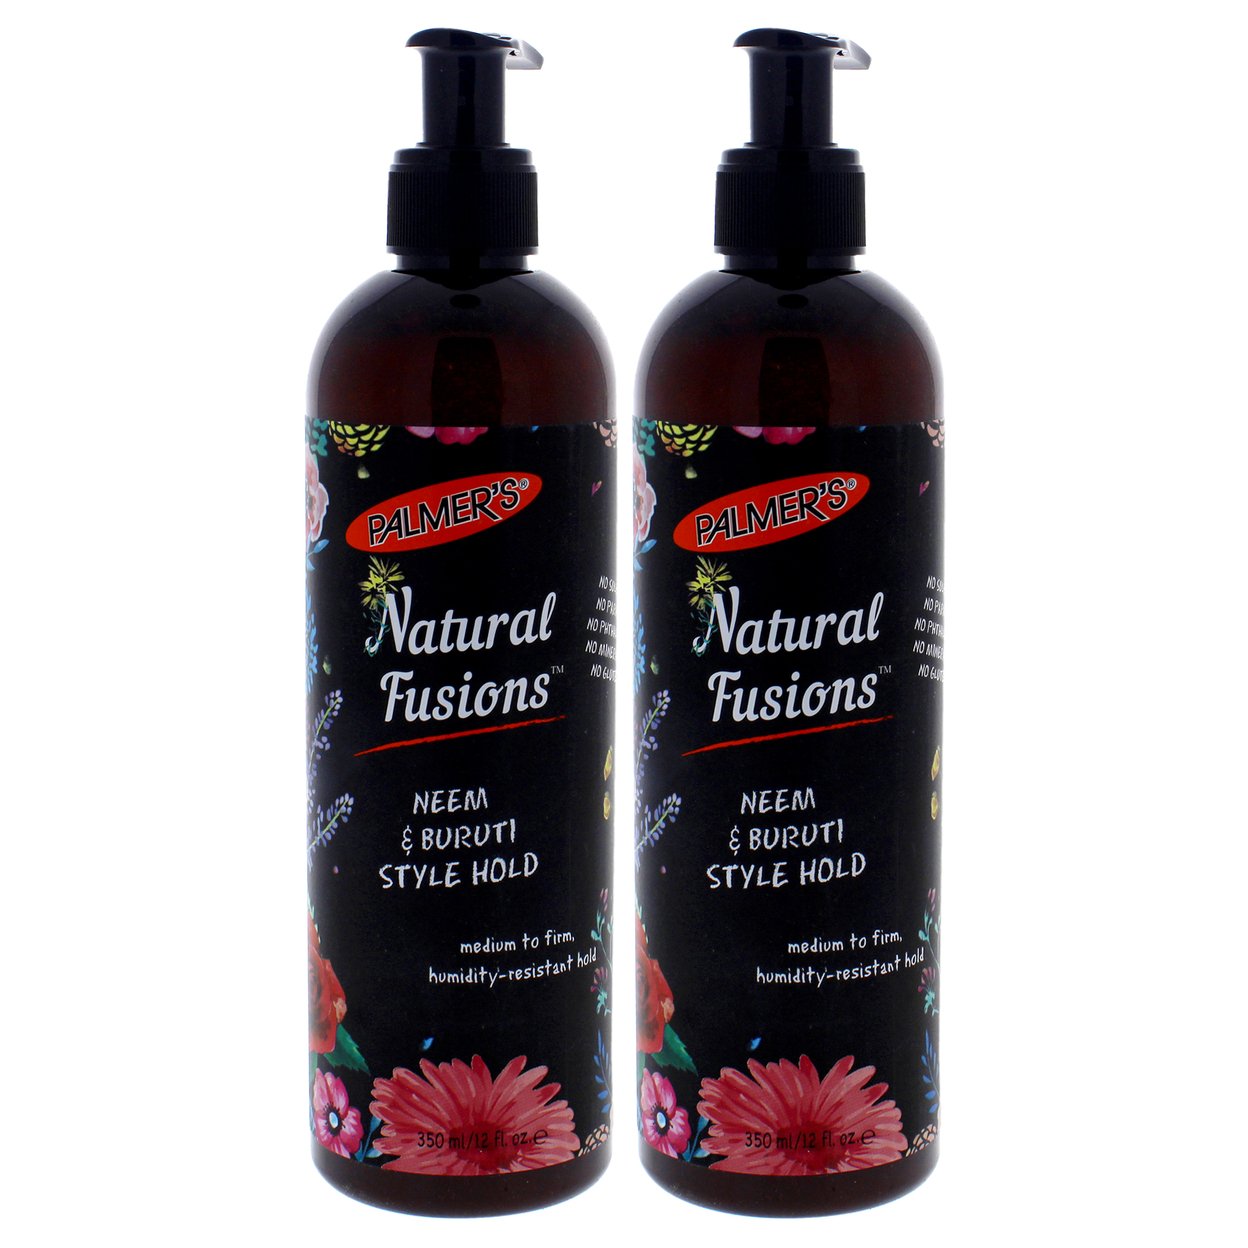 Palmers Natural Fusions Neem And Buruti Style Hold - Pack Of 2 Gel 12 Oz